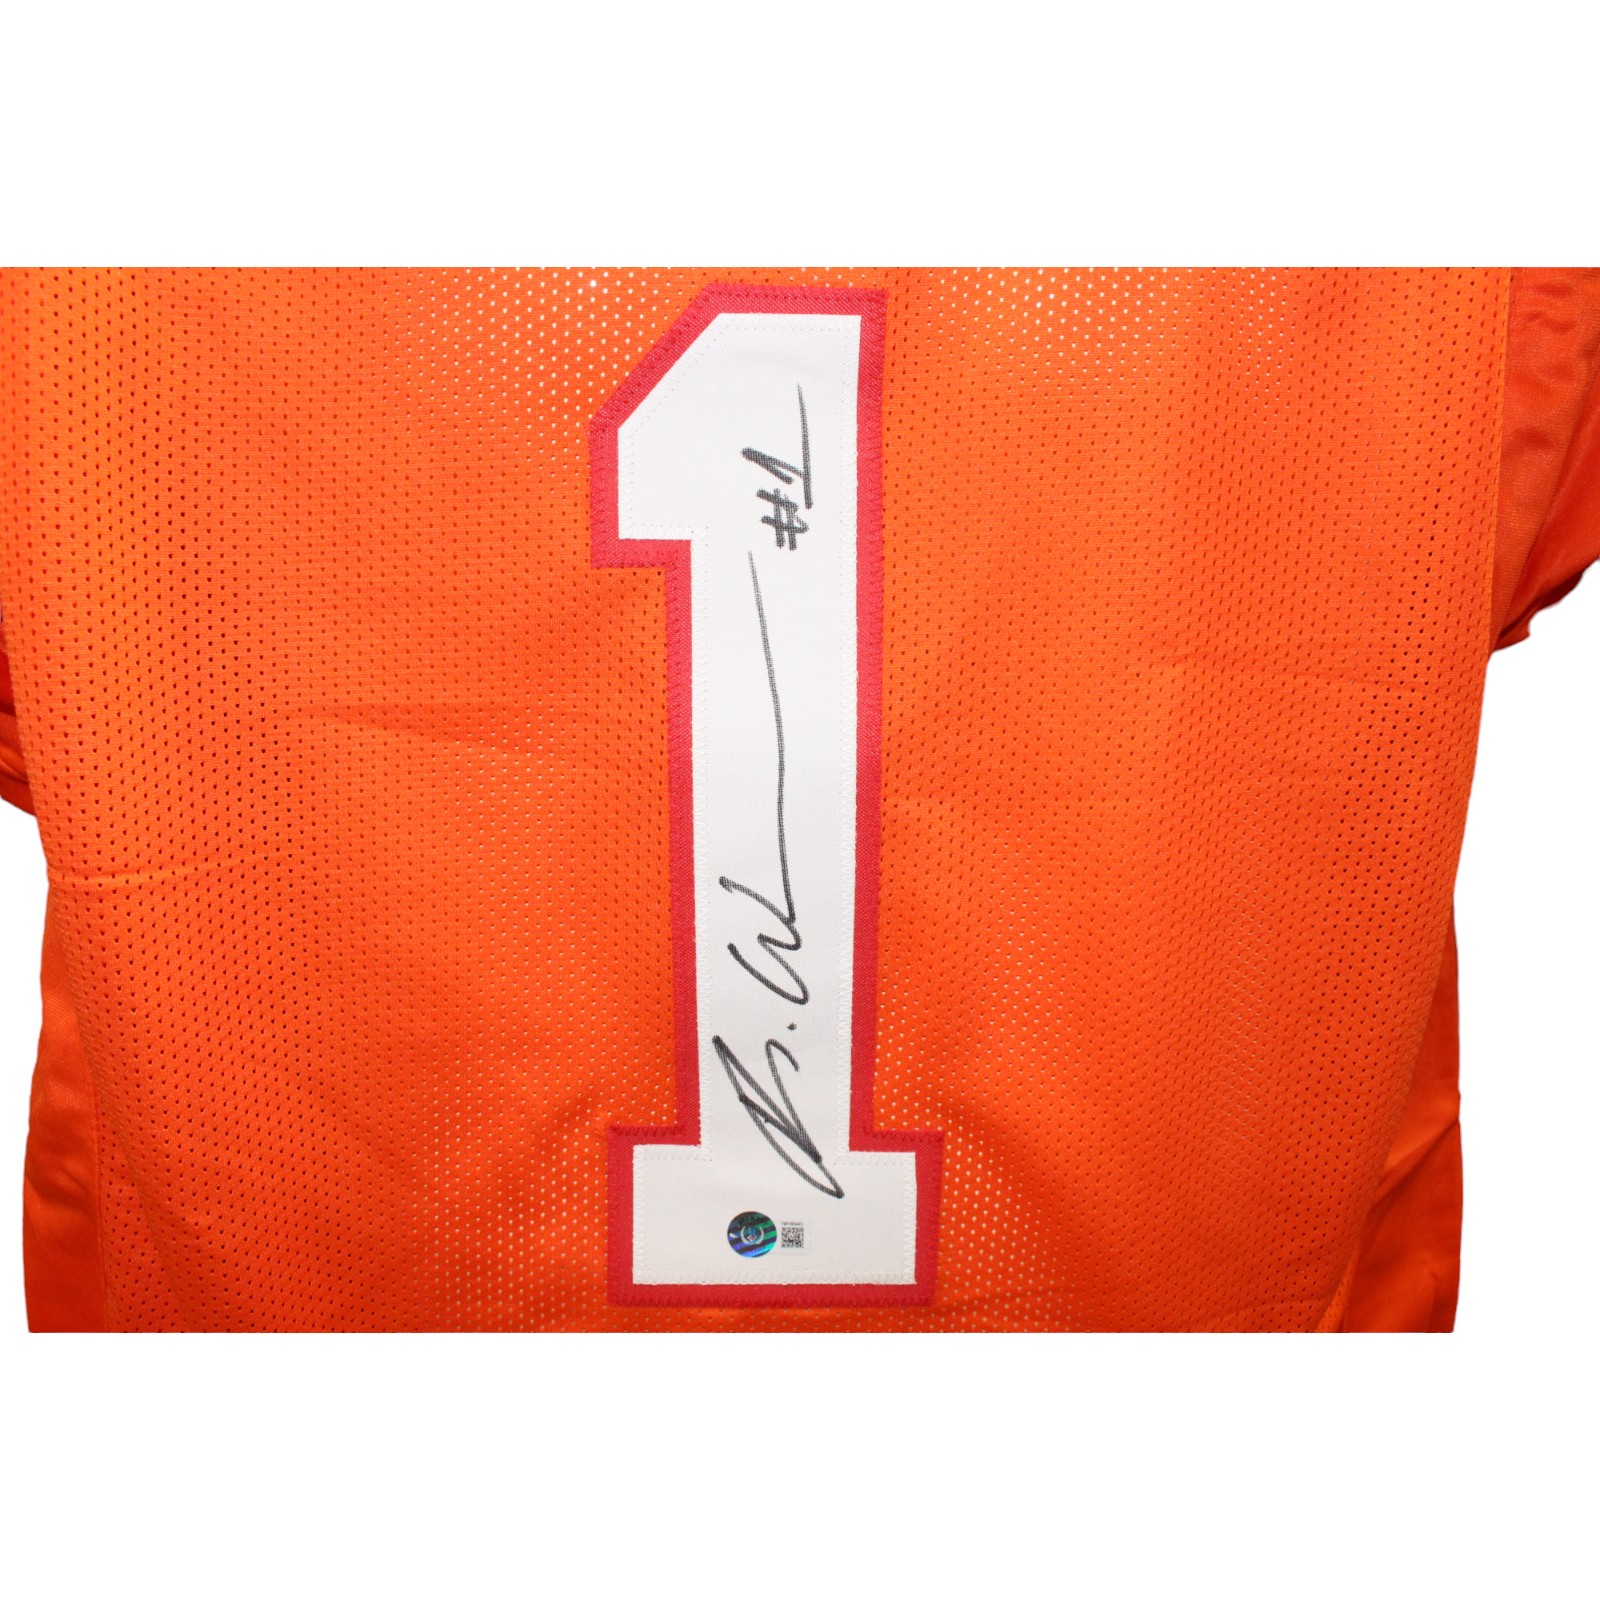 Rachaad White Autographed/Signed Pro Style TB Orange Jersey Beckett